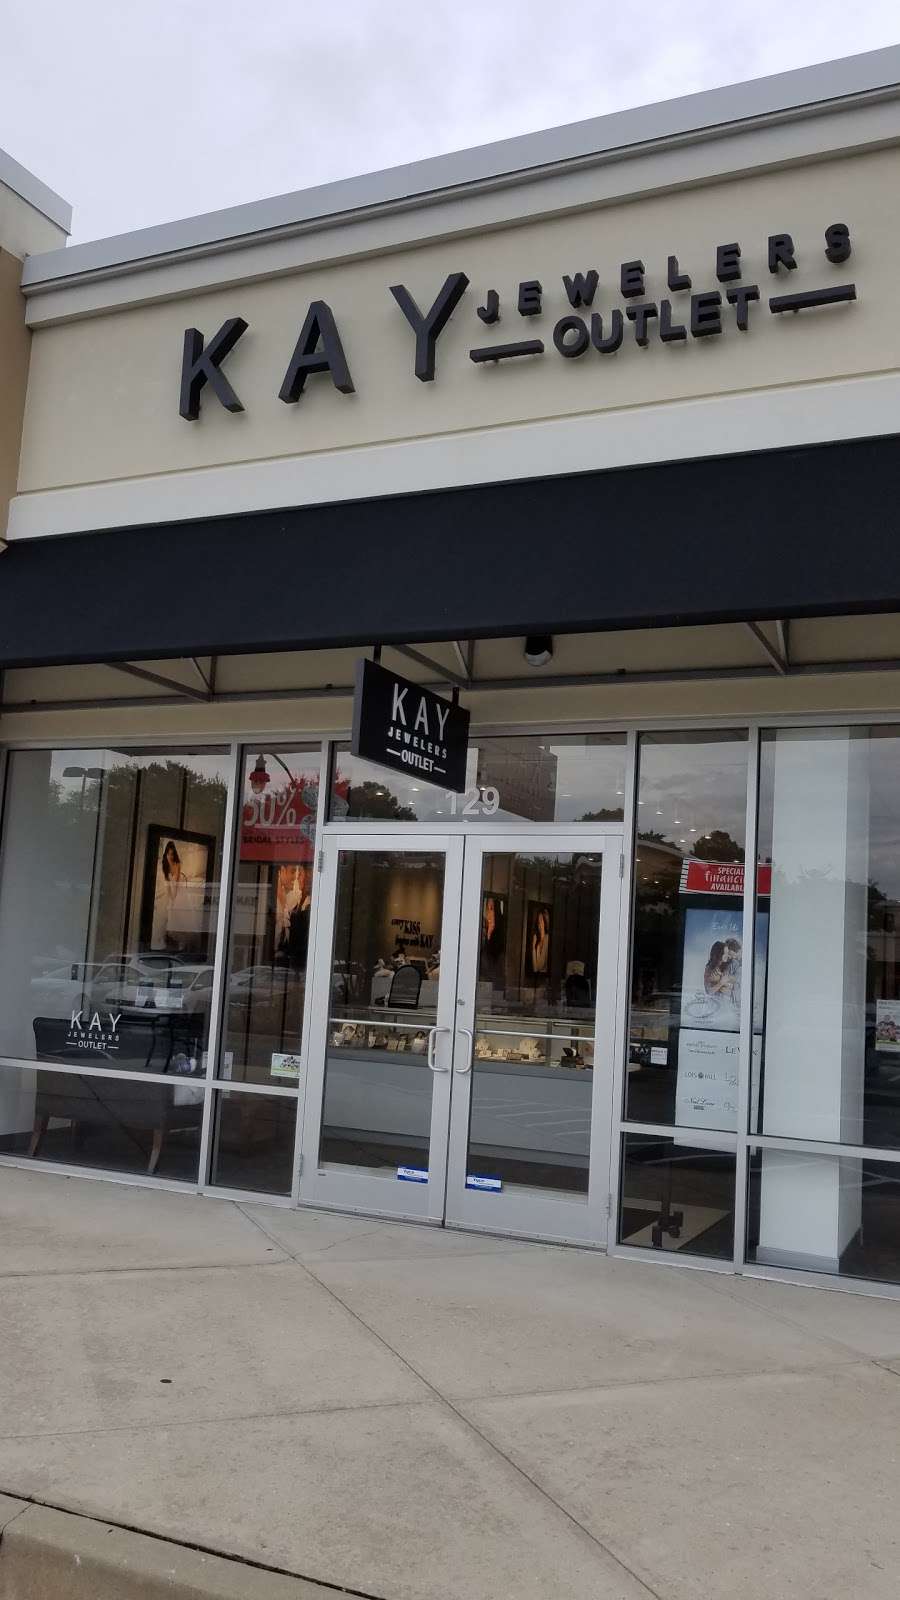 Kay Jewelers Outlet | 129 Outlet Center Dr, Queenstown, MD 21658 | Phone: (410) 827-9133